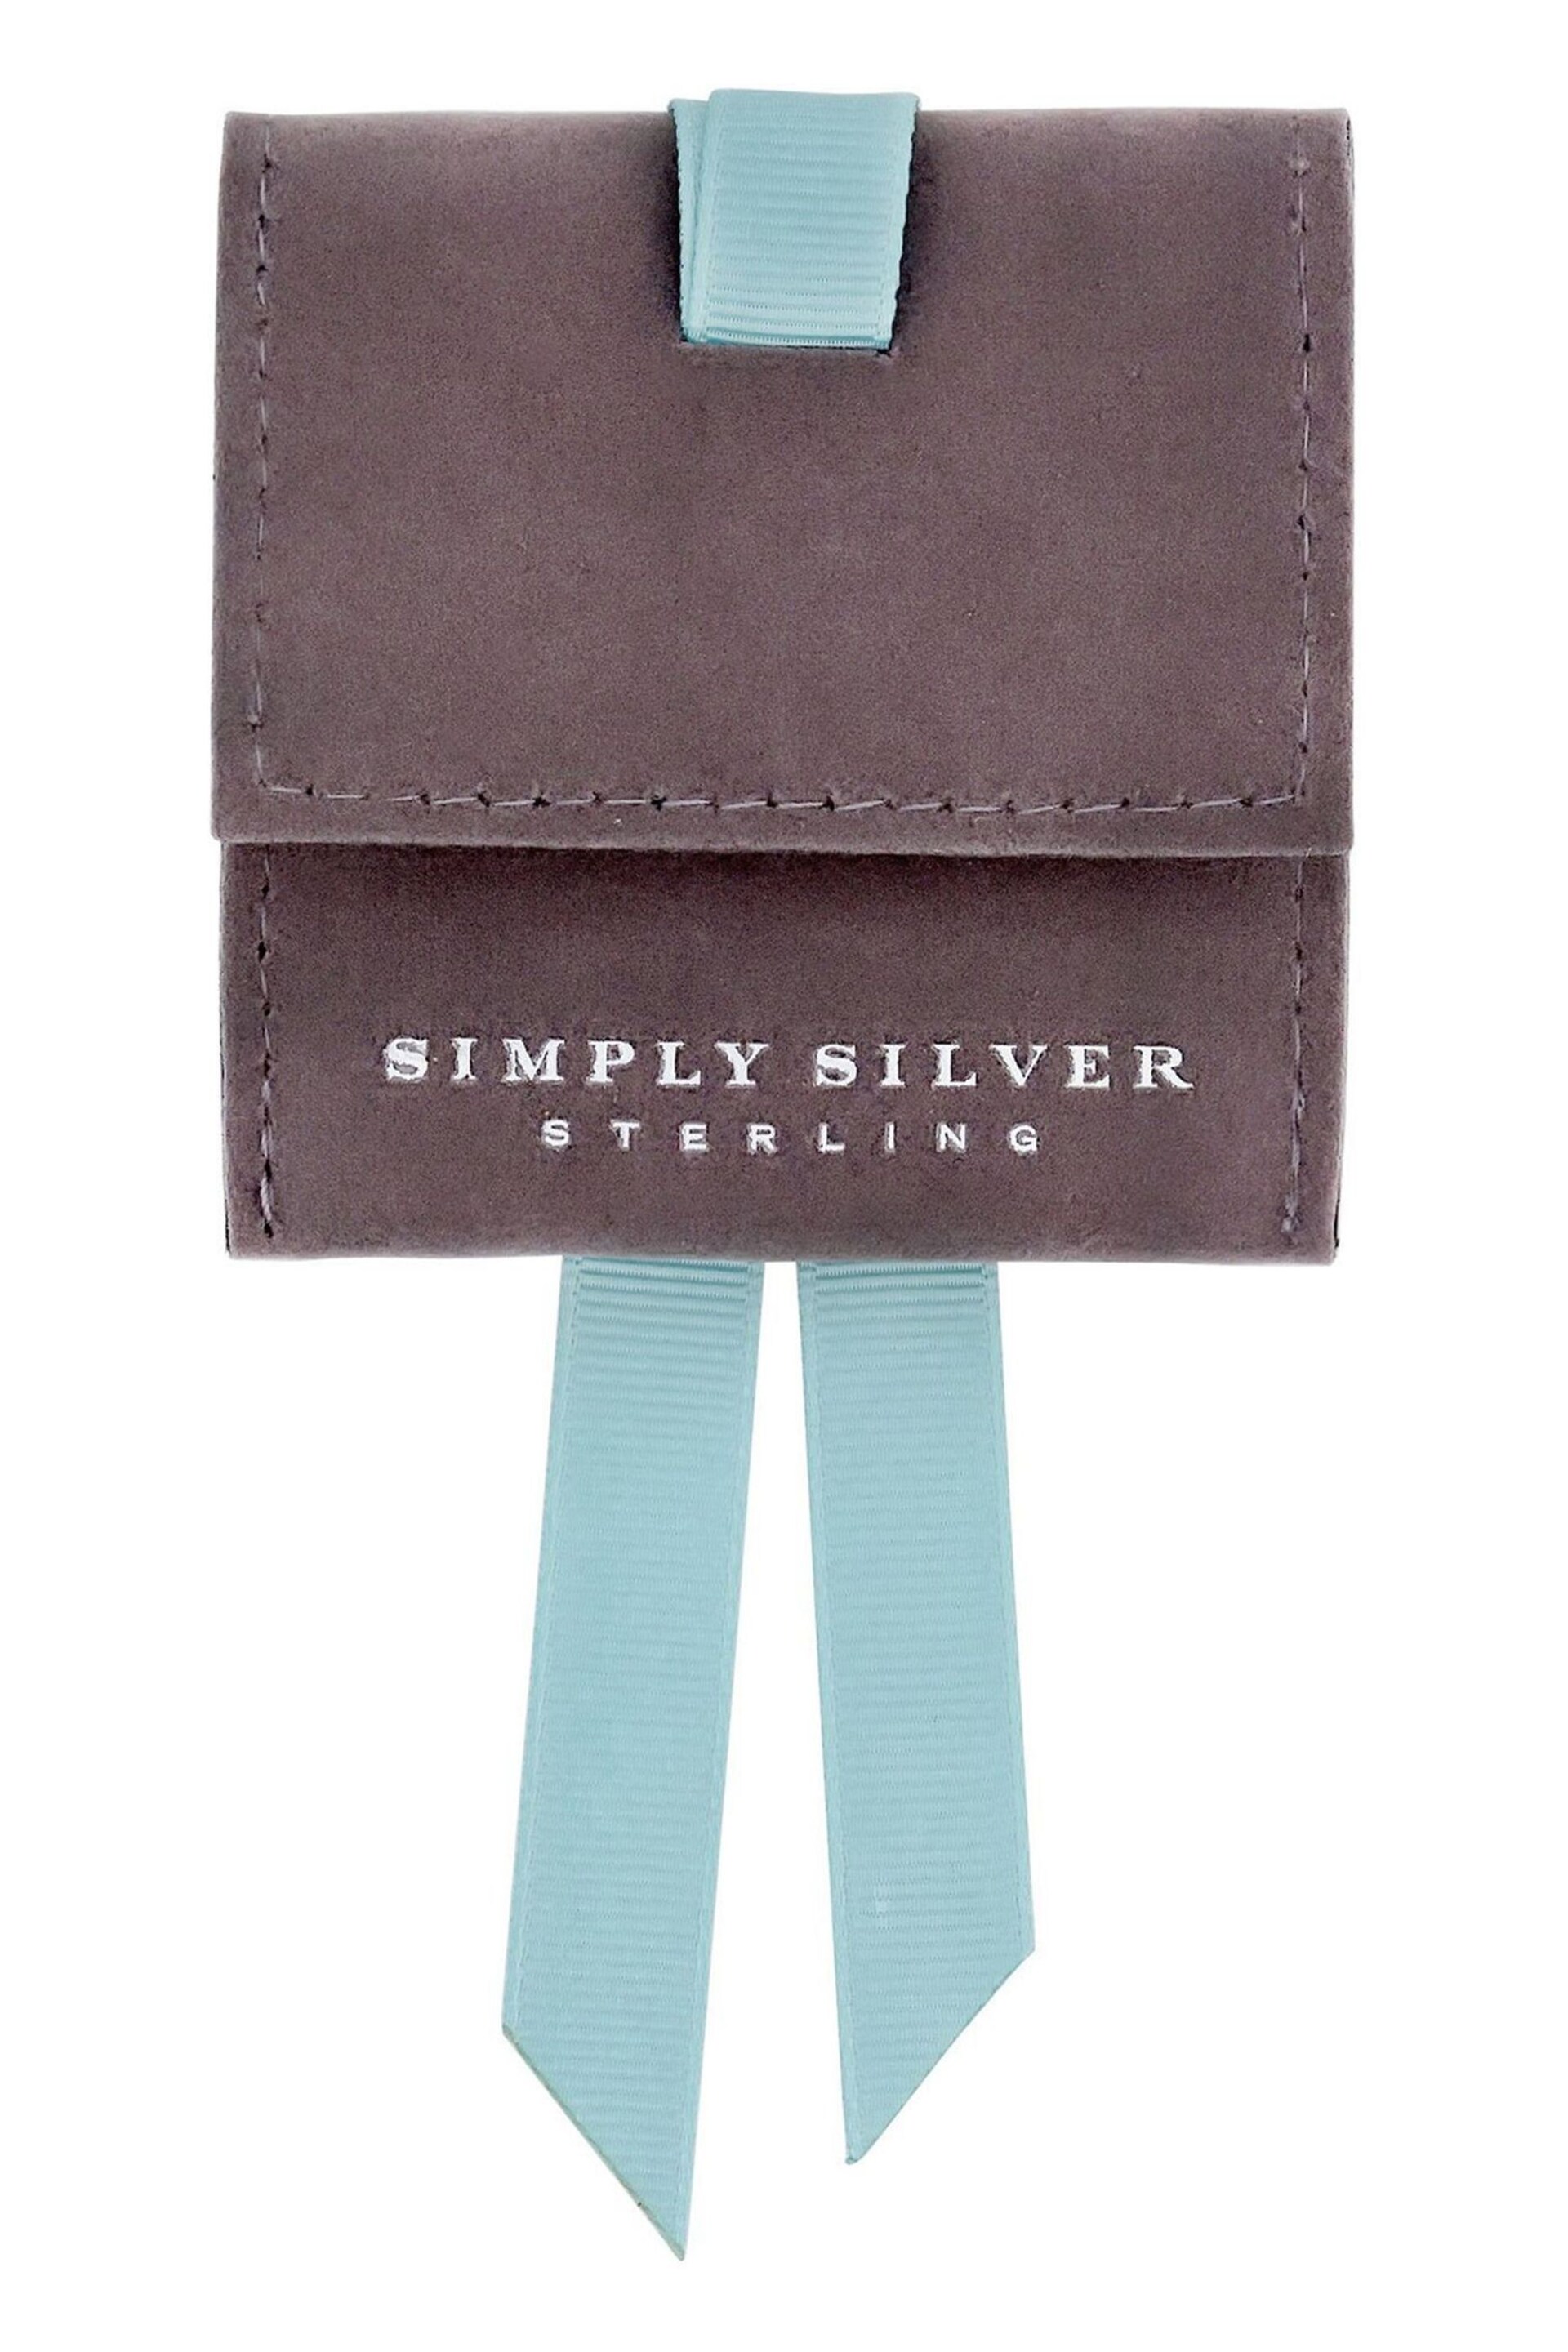 Simply Silver Grey Faux Suede Pouch With Blue Ribbon Tie - Image 2 of 2